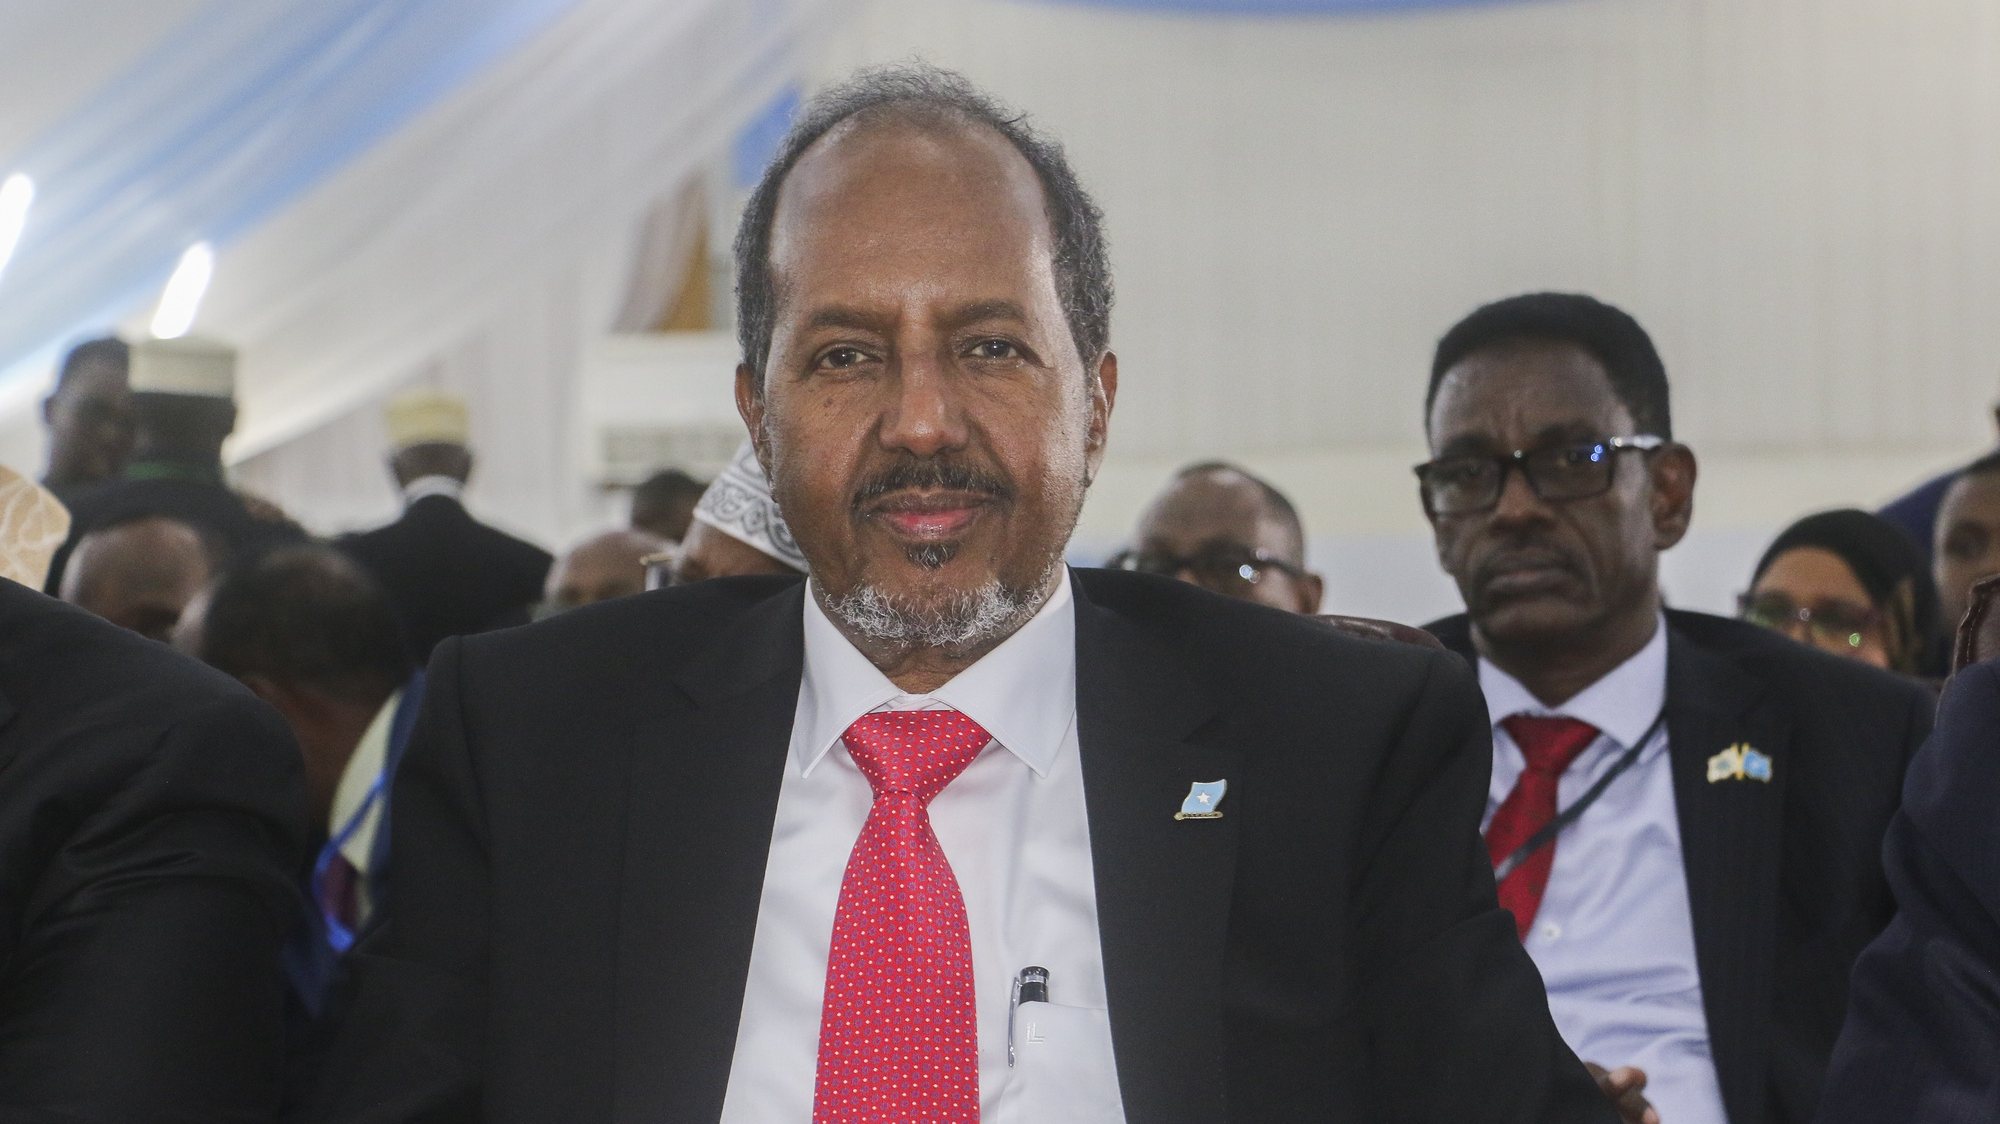 epa09949988 Former president Hassan Sheikh Mohamud after being sworn in as the new president of Somalia after being elected by Somali members of parliament in the presidential elections in the capital Mogadishu, Somalia, 15 May 2022. Voting took place at Mogadishu&#039;s fortified airport only involving the country&#039;s 329 members of parliament, following long delays.  EPA/SAID YUSUF WARSAME